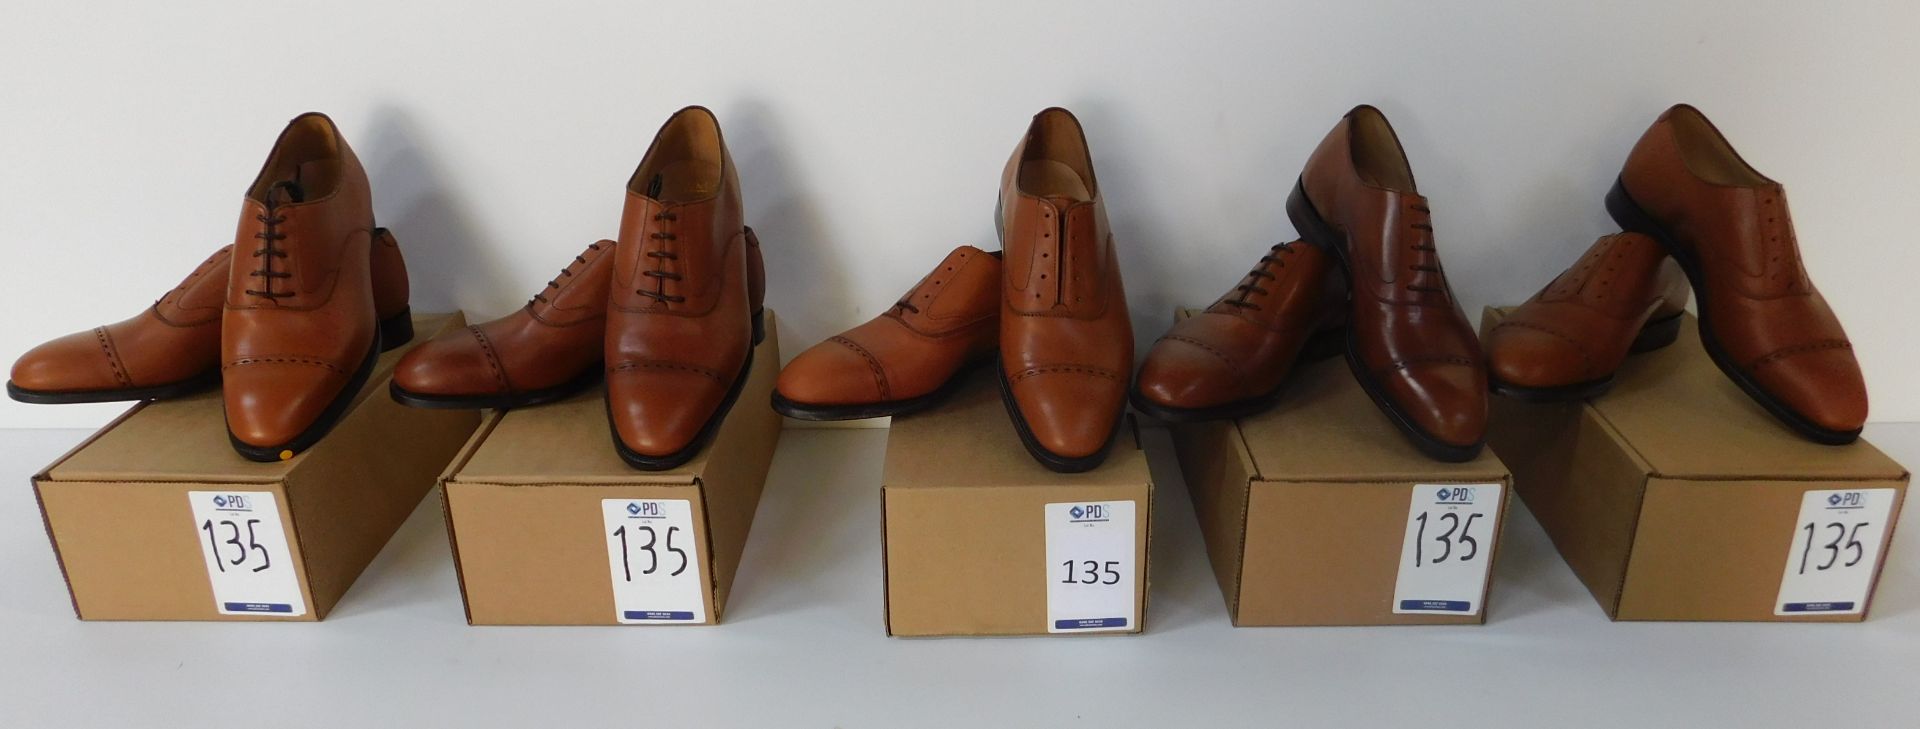 5 Pairs of Peal & Co 100029132 tan CAP, Sizes 8.5, 8.5, 9, 9.5 & 10 (Slight Seconds) (Location